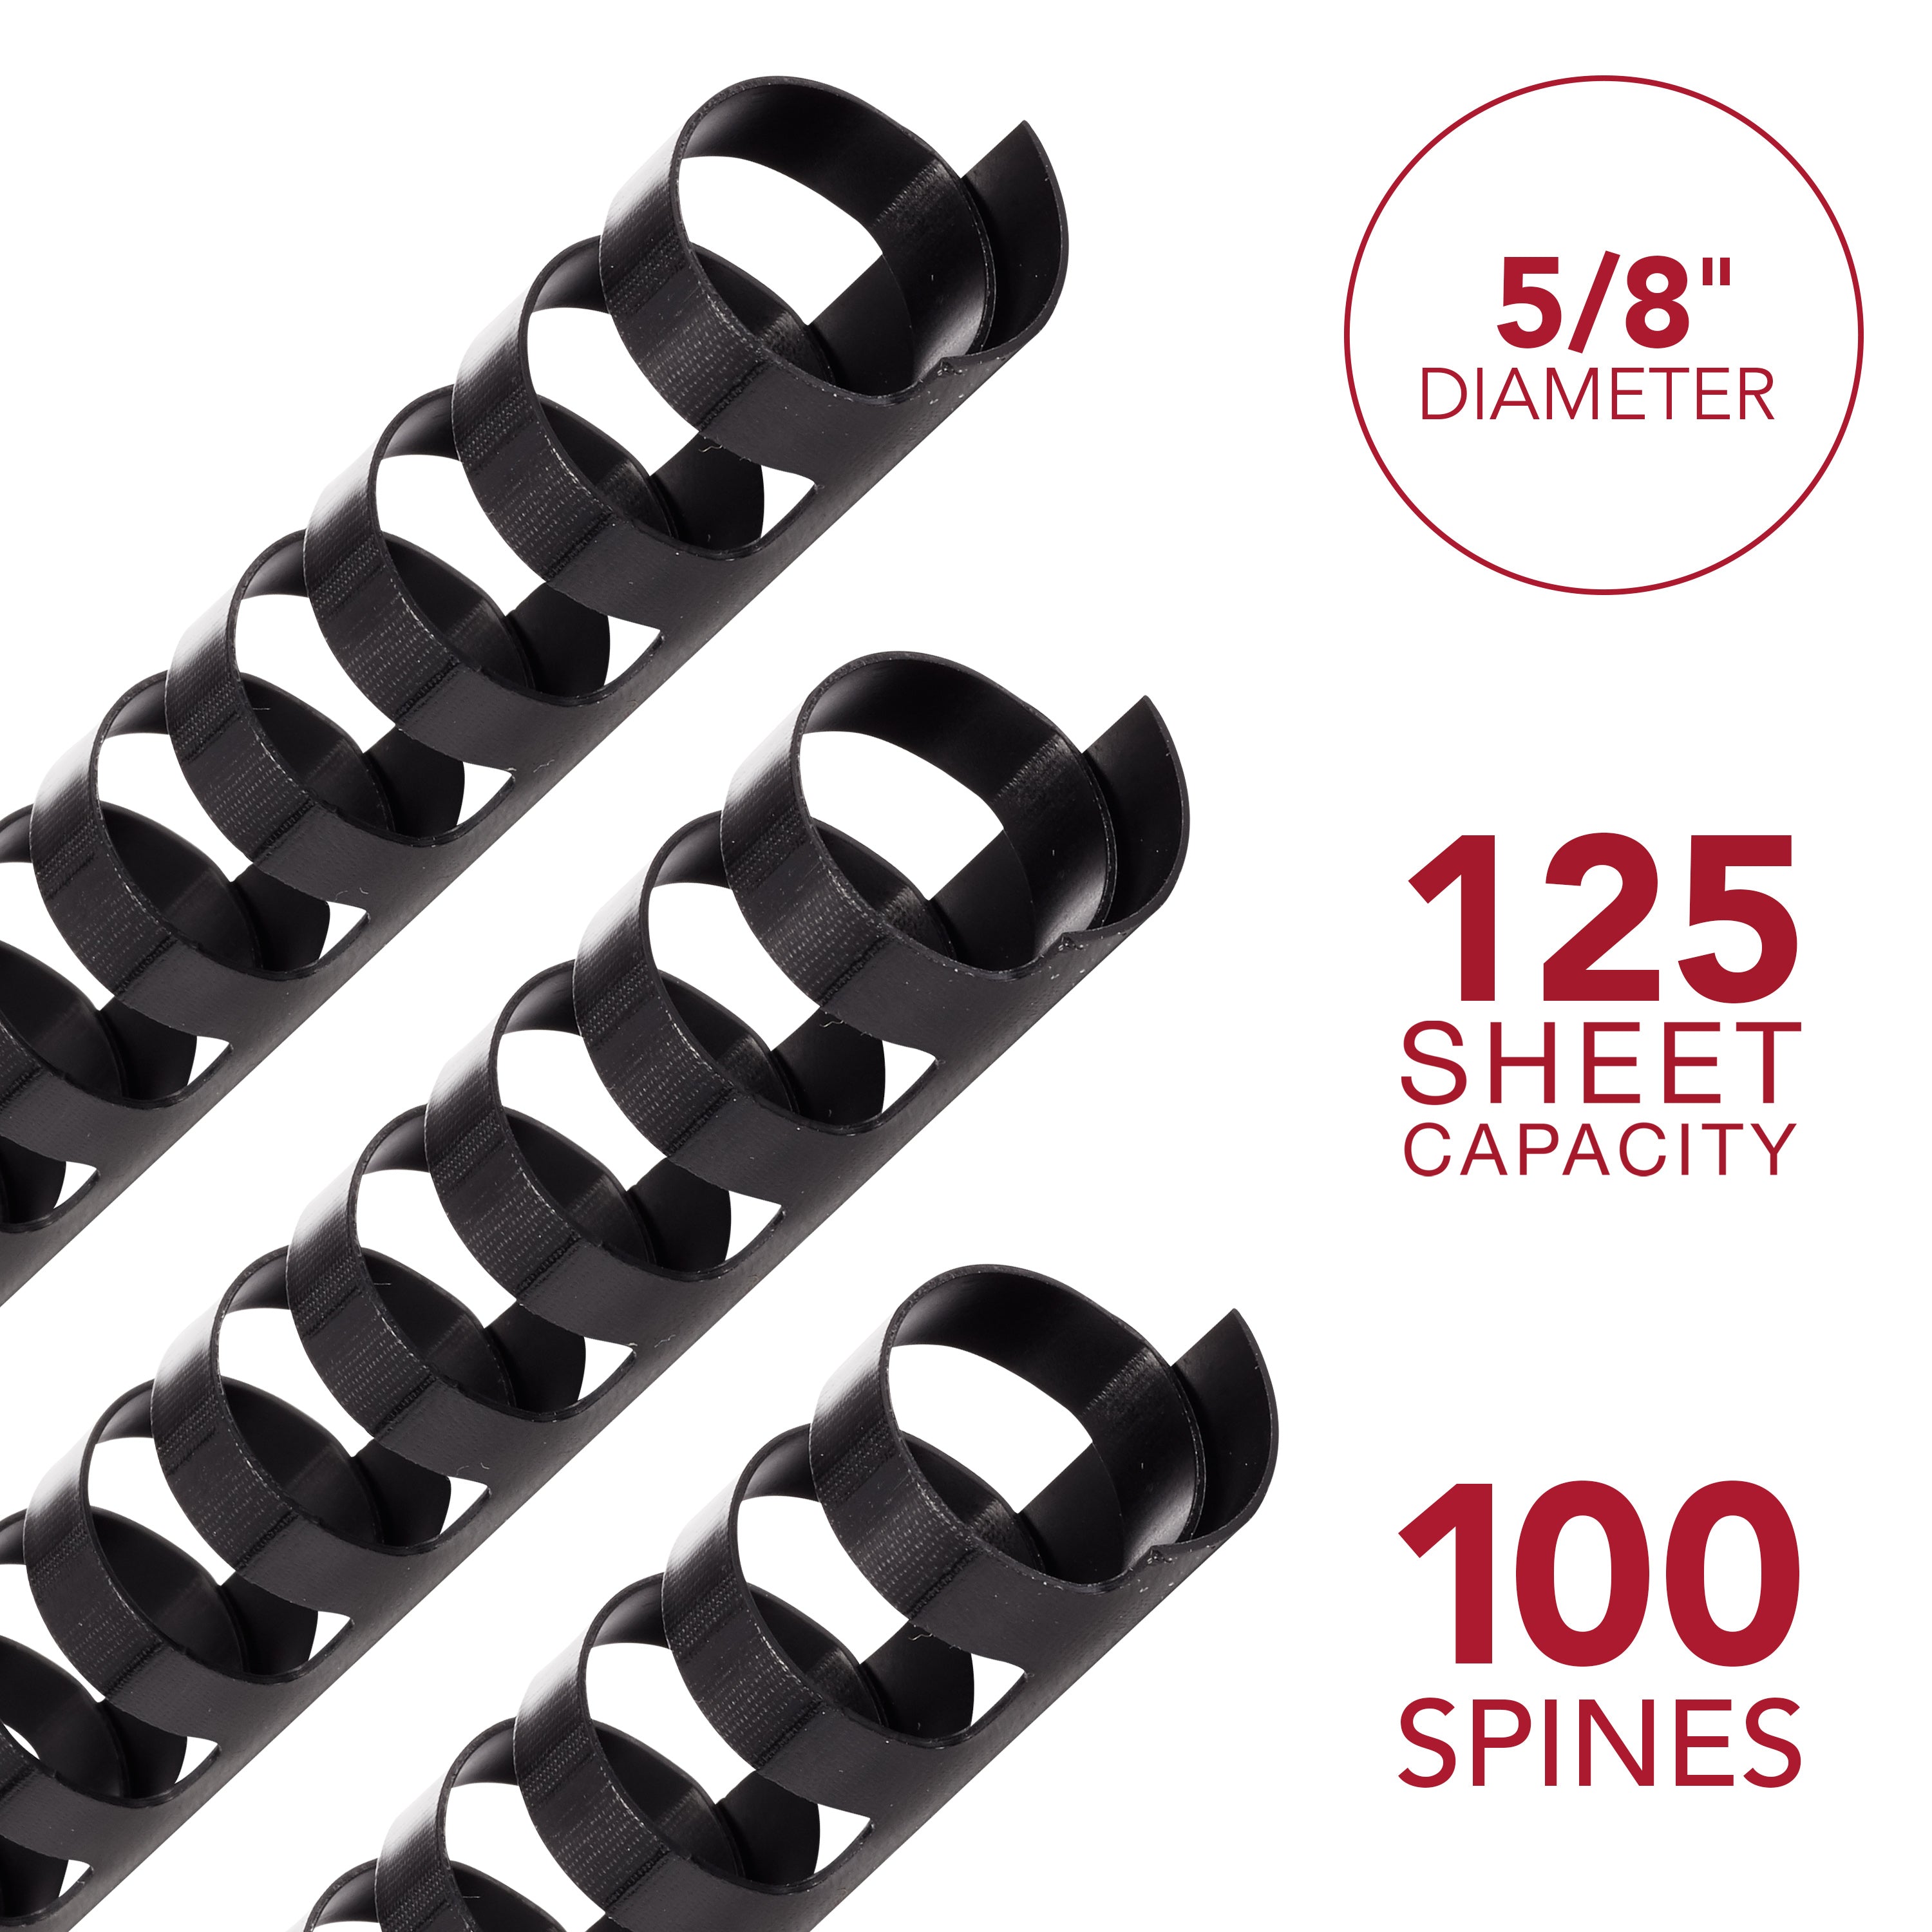 GBC CombBind 5/8" Binding Spines (100 Pack)